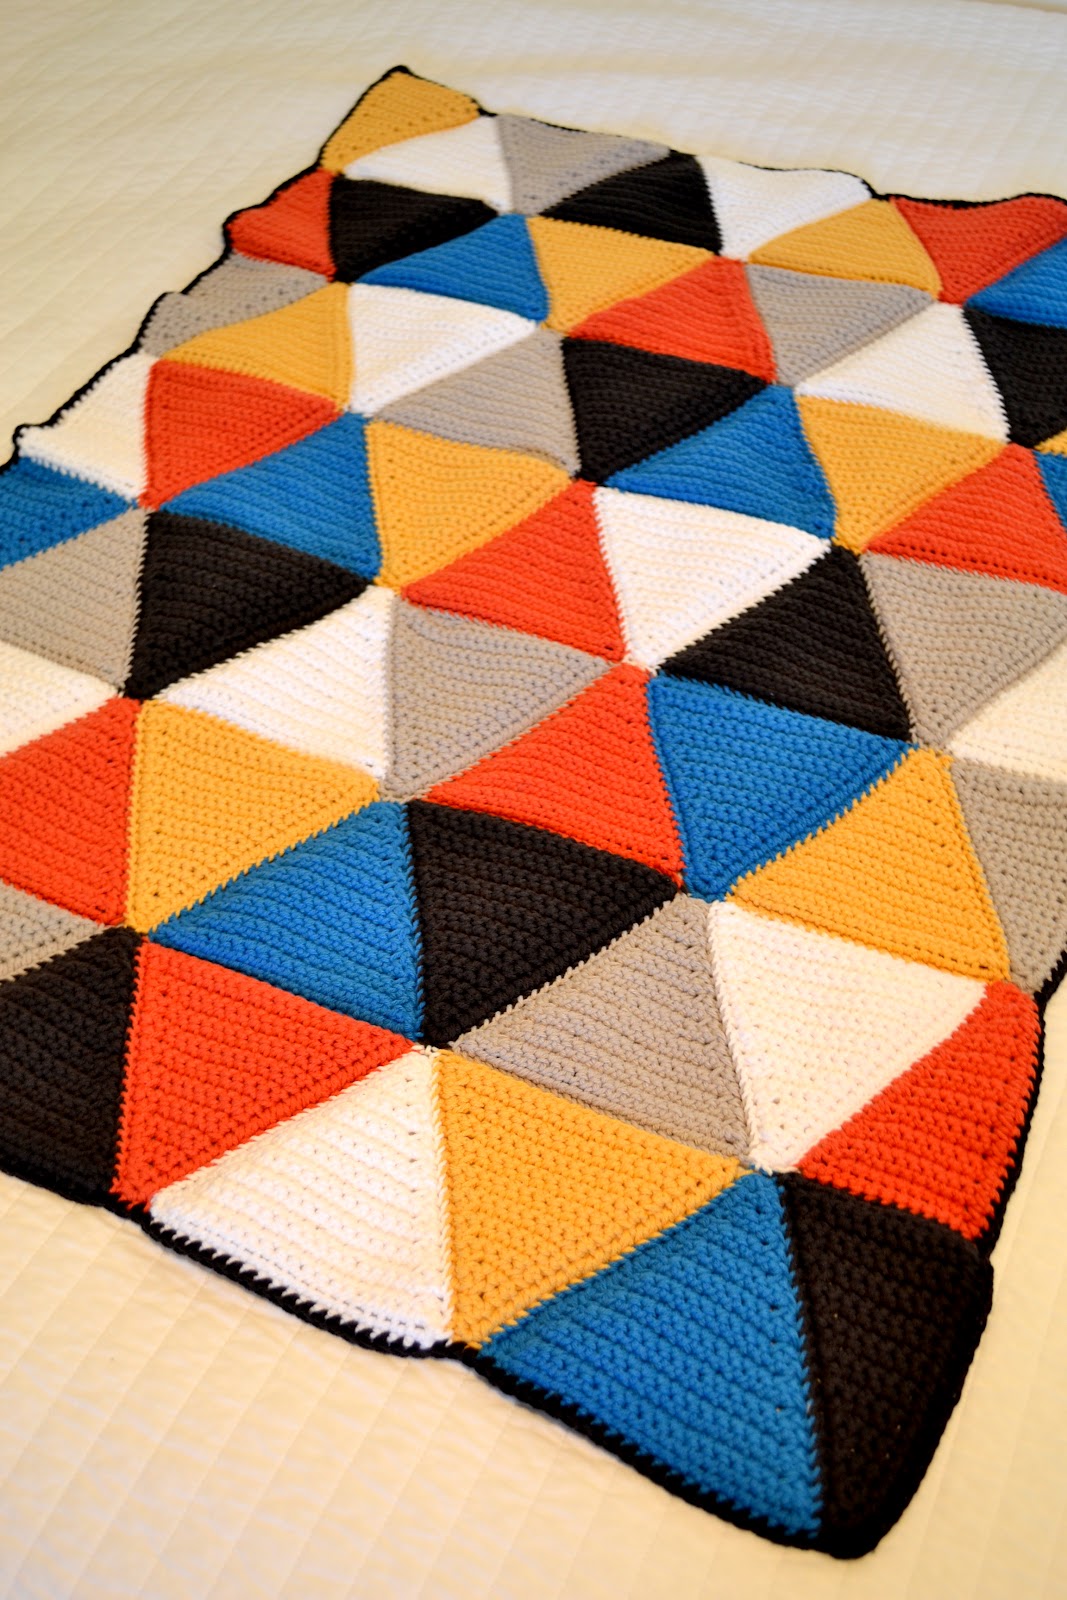 All Things Bright and Beautiful: Crochet Triangle Blanket Pattern and